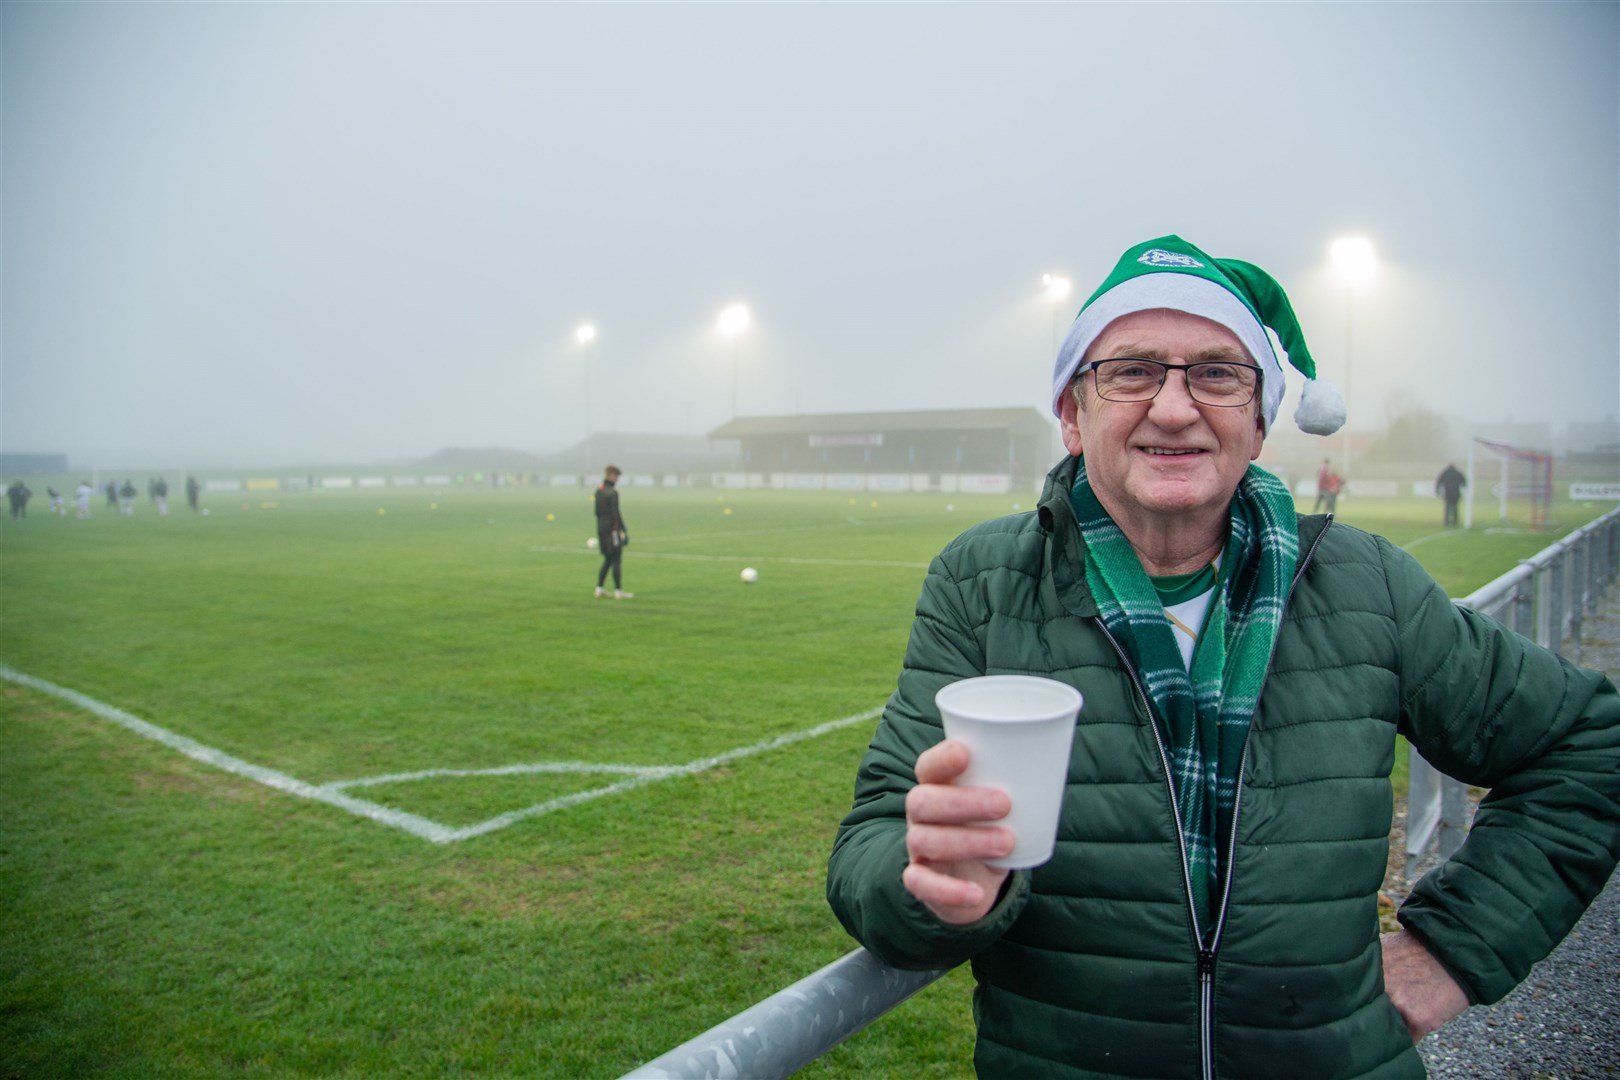 One festive Buckie supporter still smiling despite the call off. Picture: Daniel Forsyth..